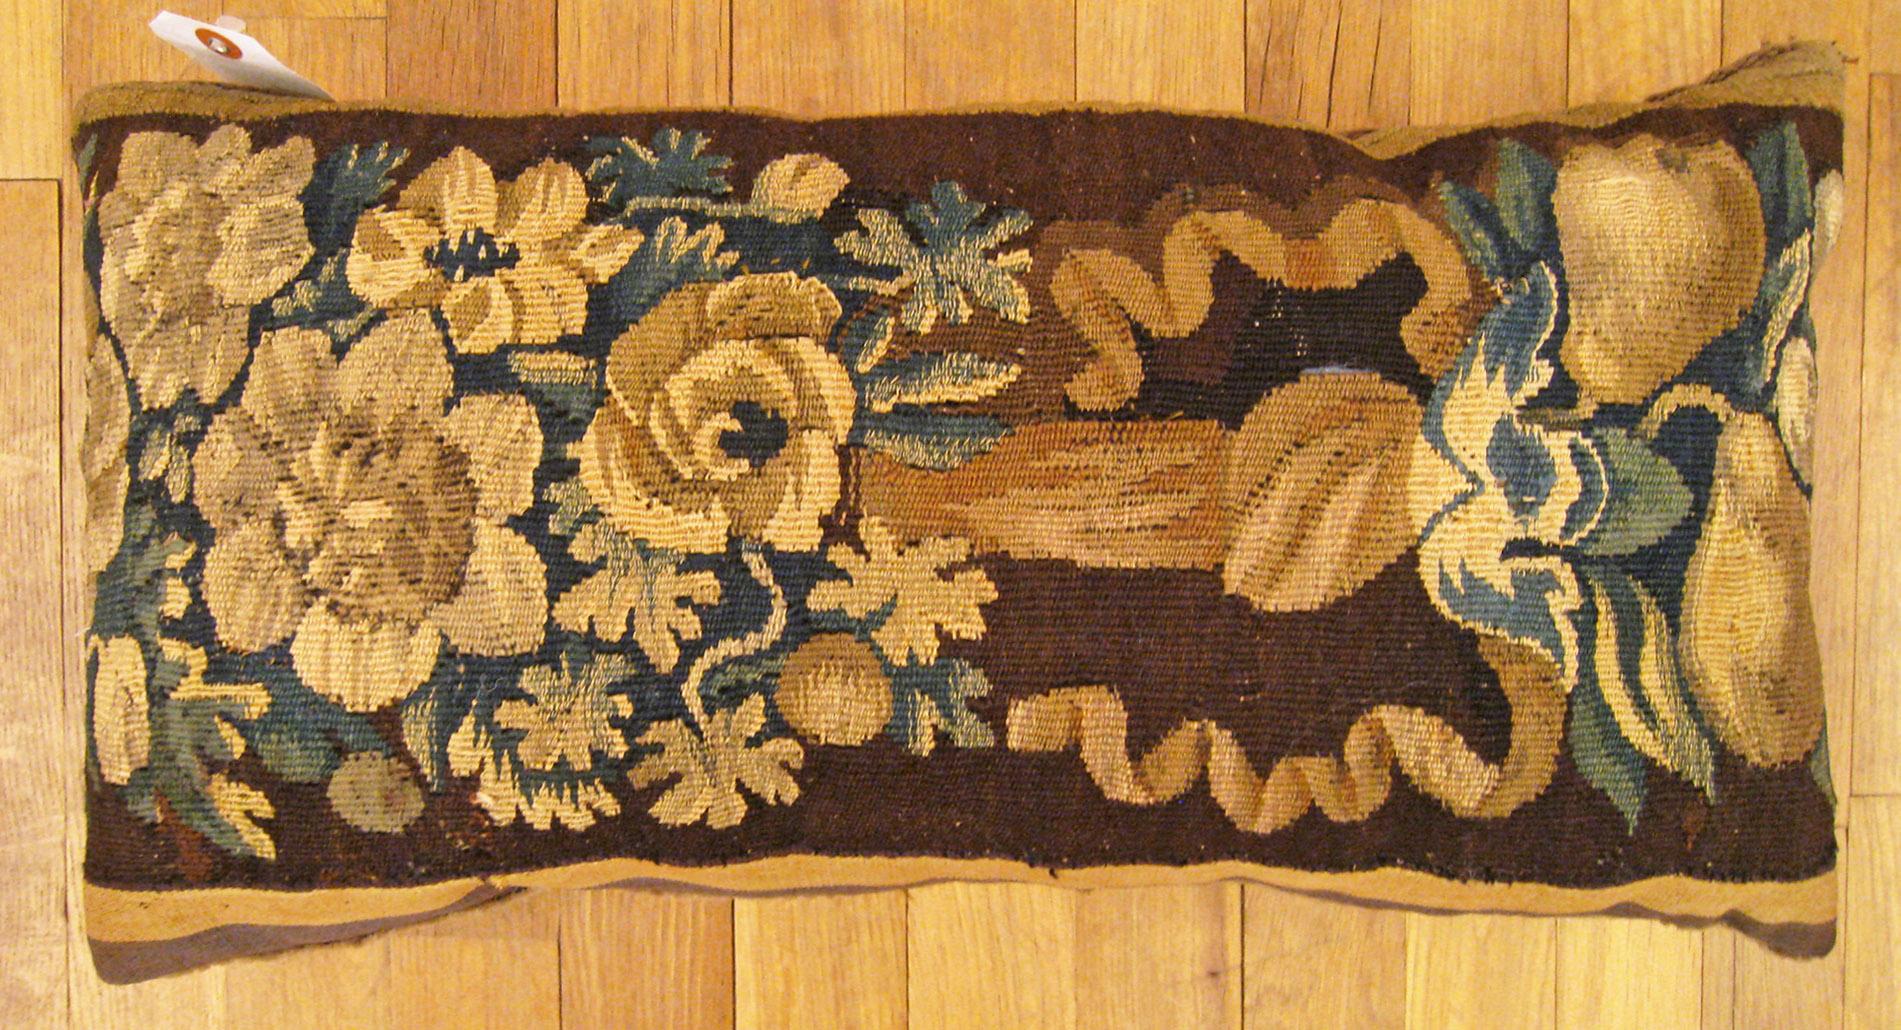 Antique 18th century tapestry pillow; size 1'0” x 1'10”.

An antique decorative pillow with floral elements allover a brown central field, size 1'0” x 1'10”. This lovely decorative pillow features an antique fabric of a 18th century tapestry on